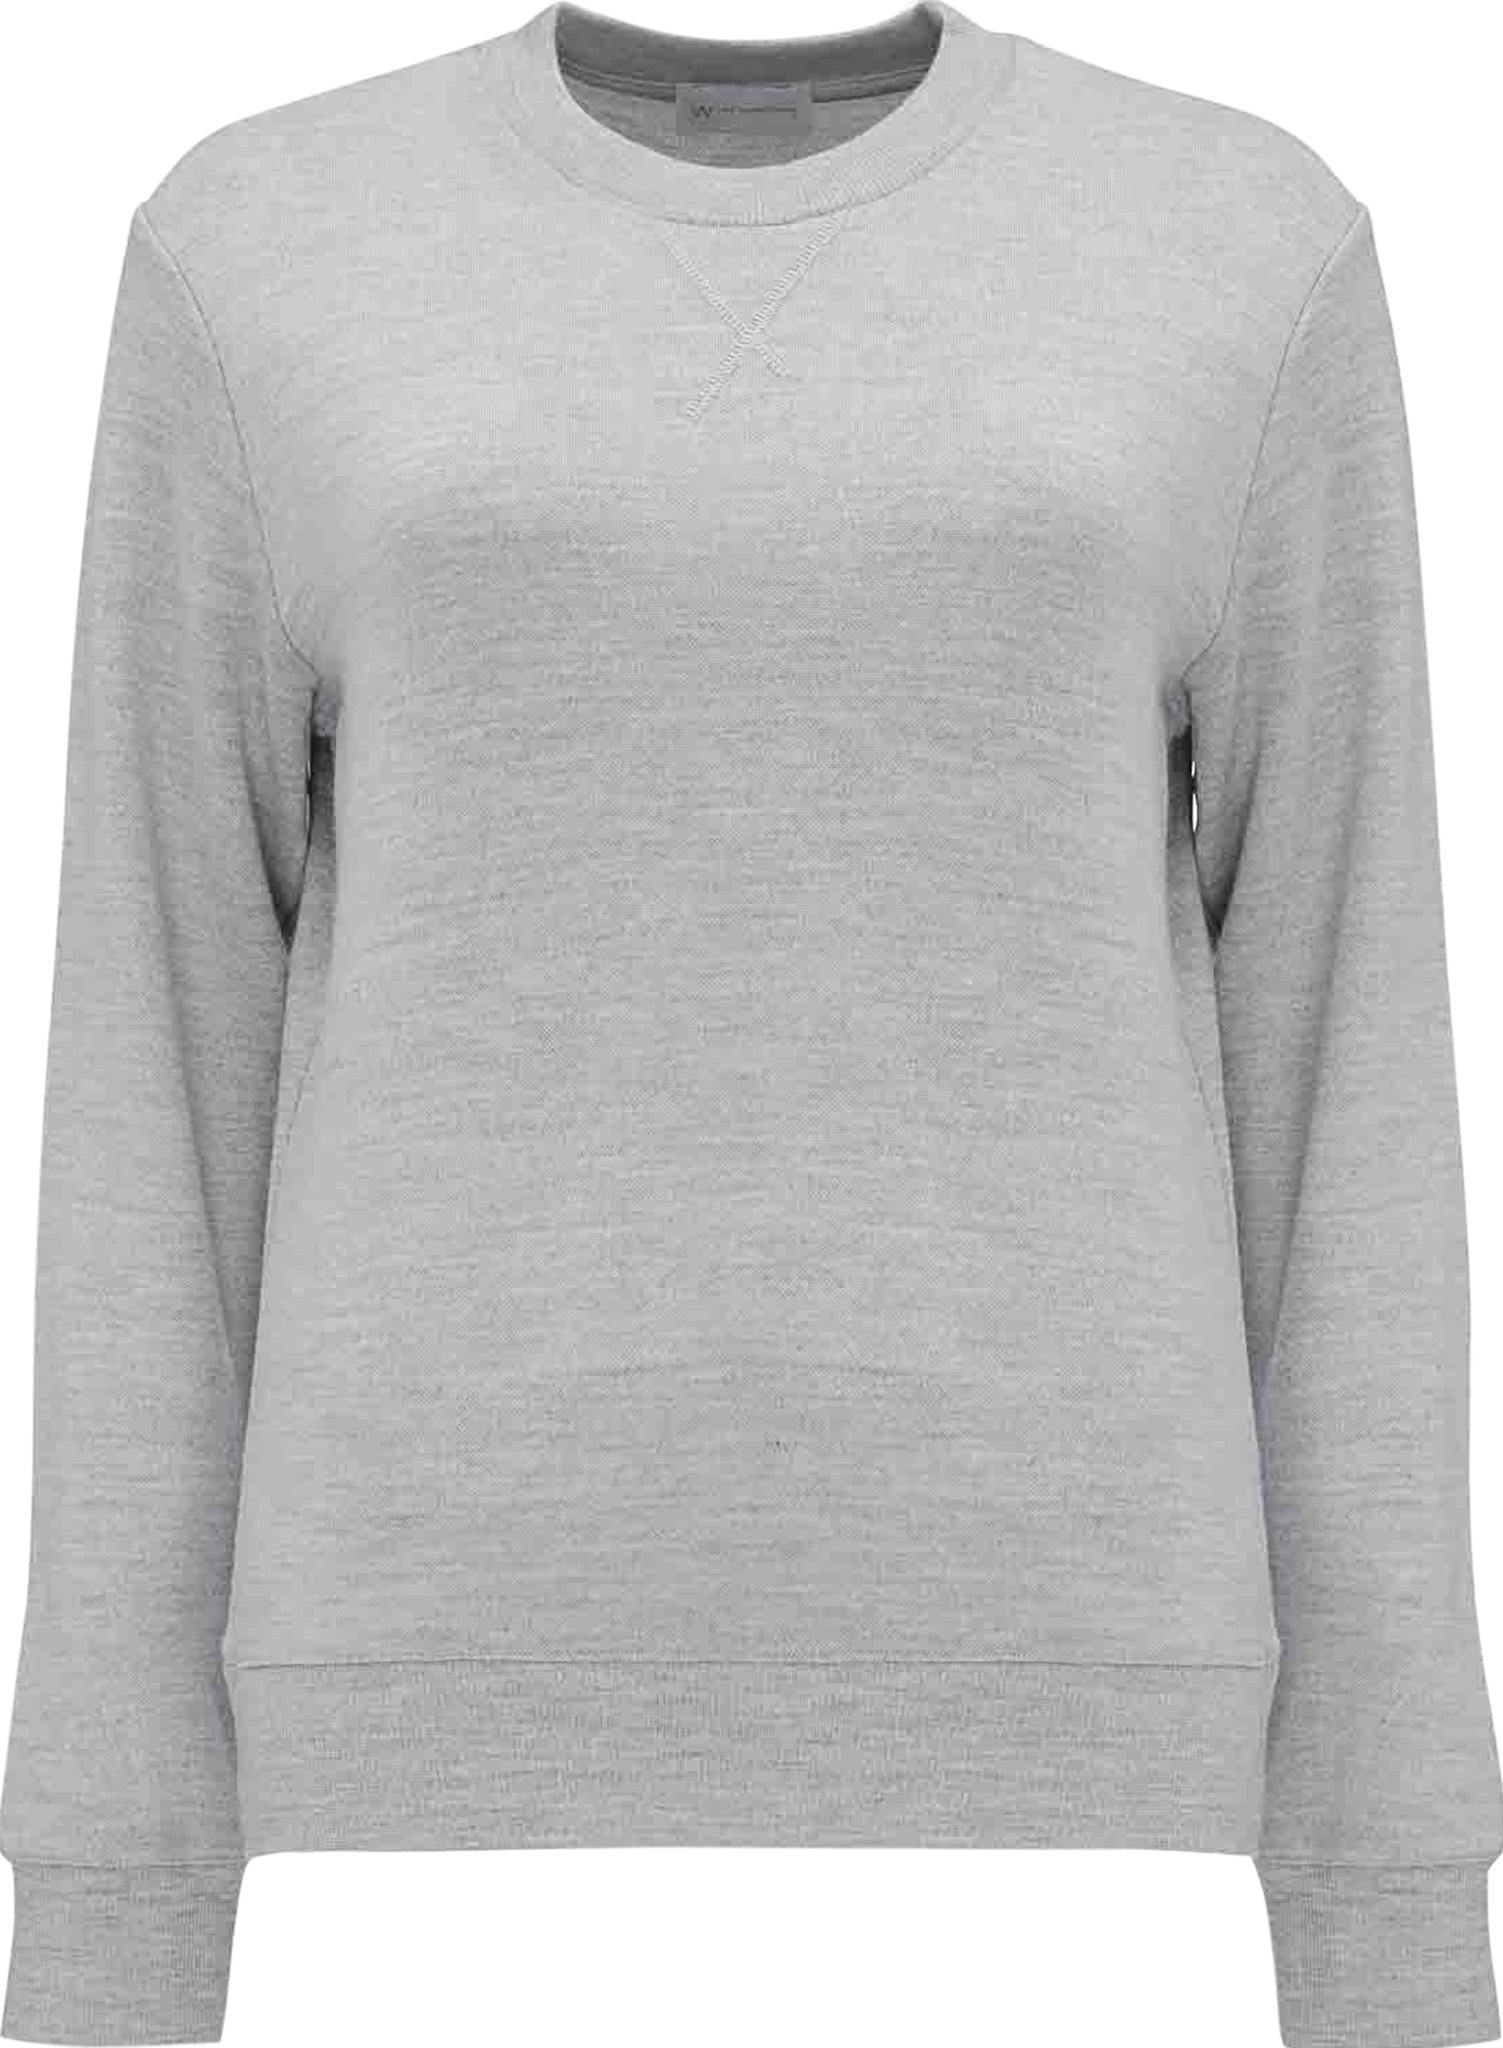 Product image for Tind Crewneck Sweater - Women's